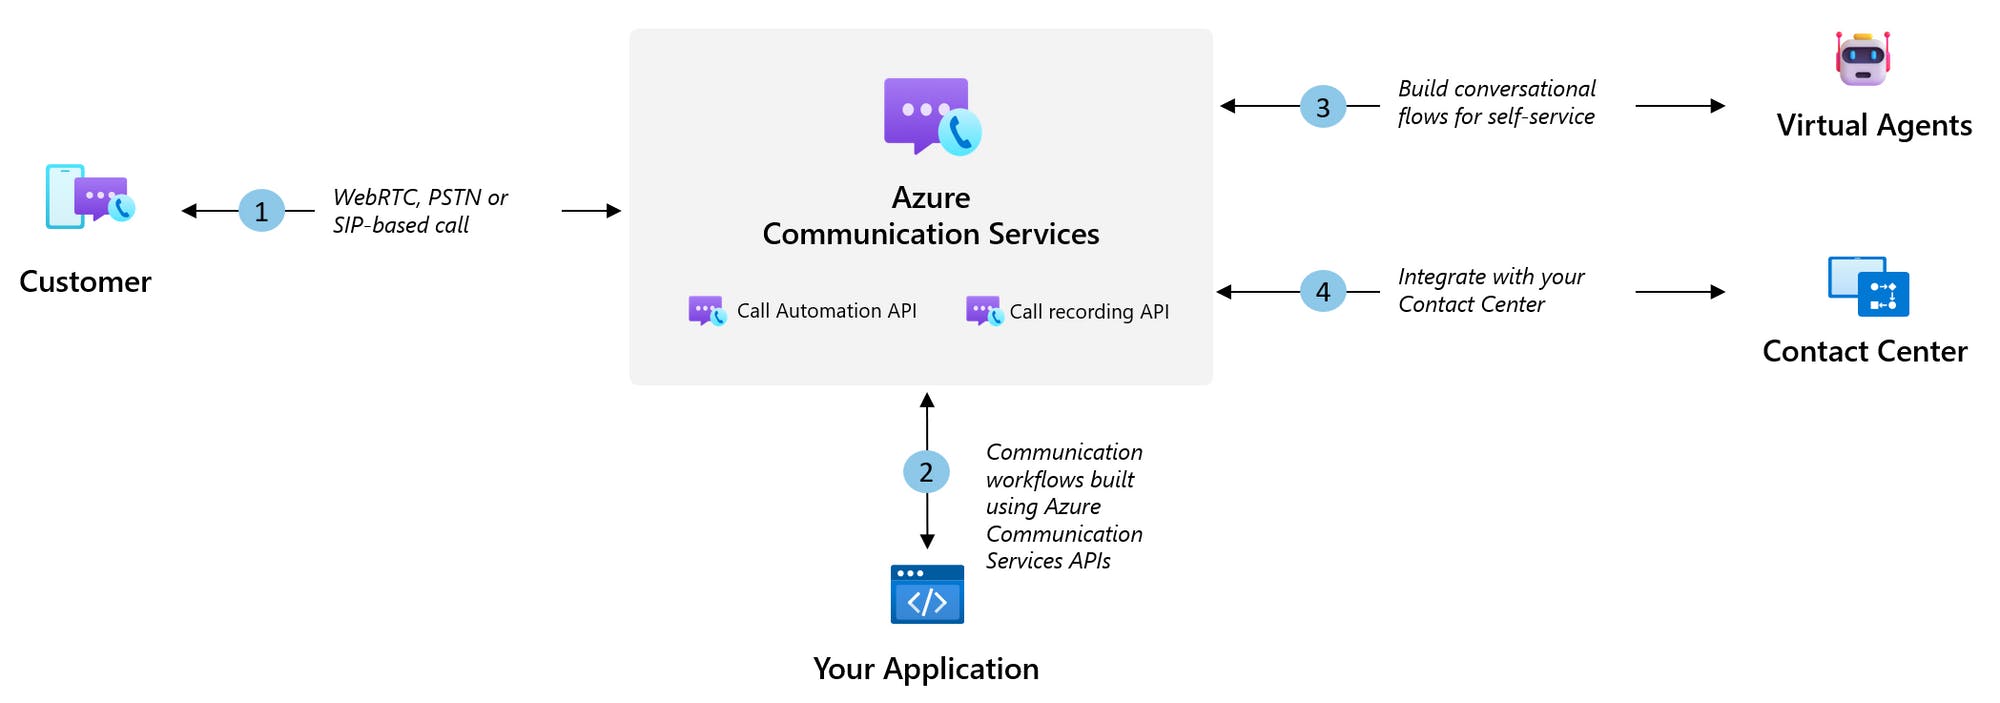 Call Automation APIs in Azure Communication Services